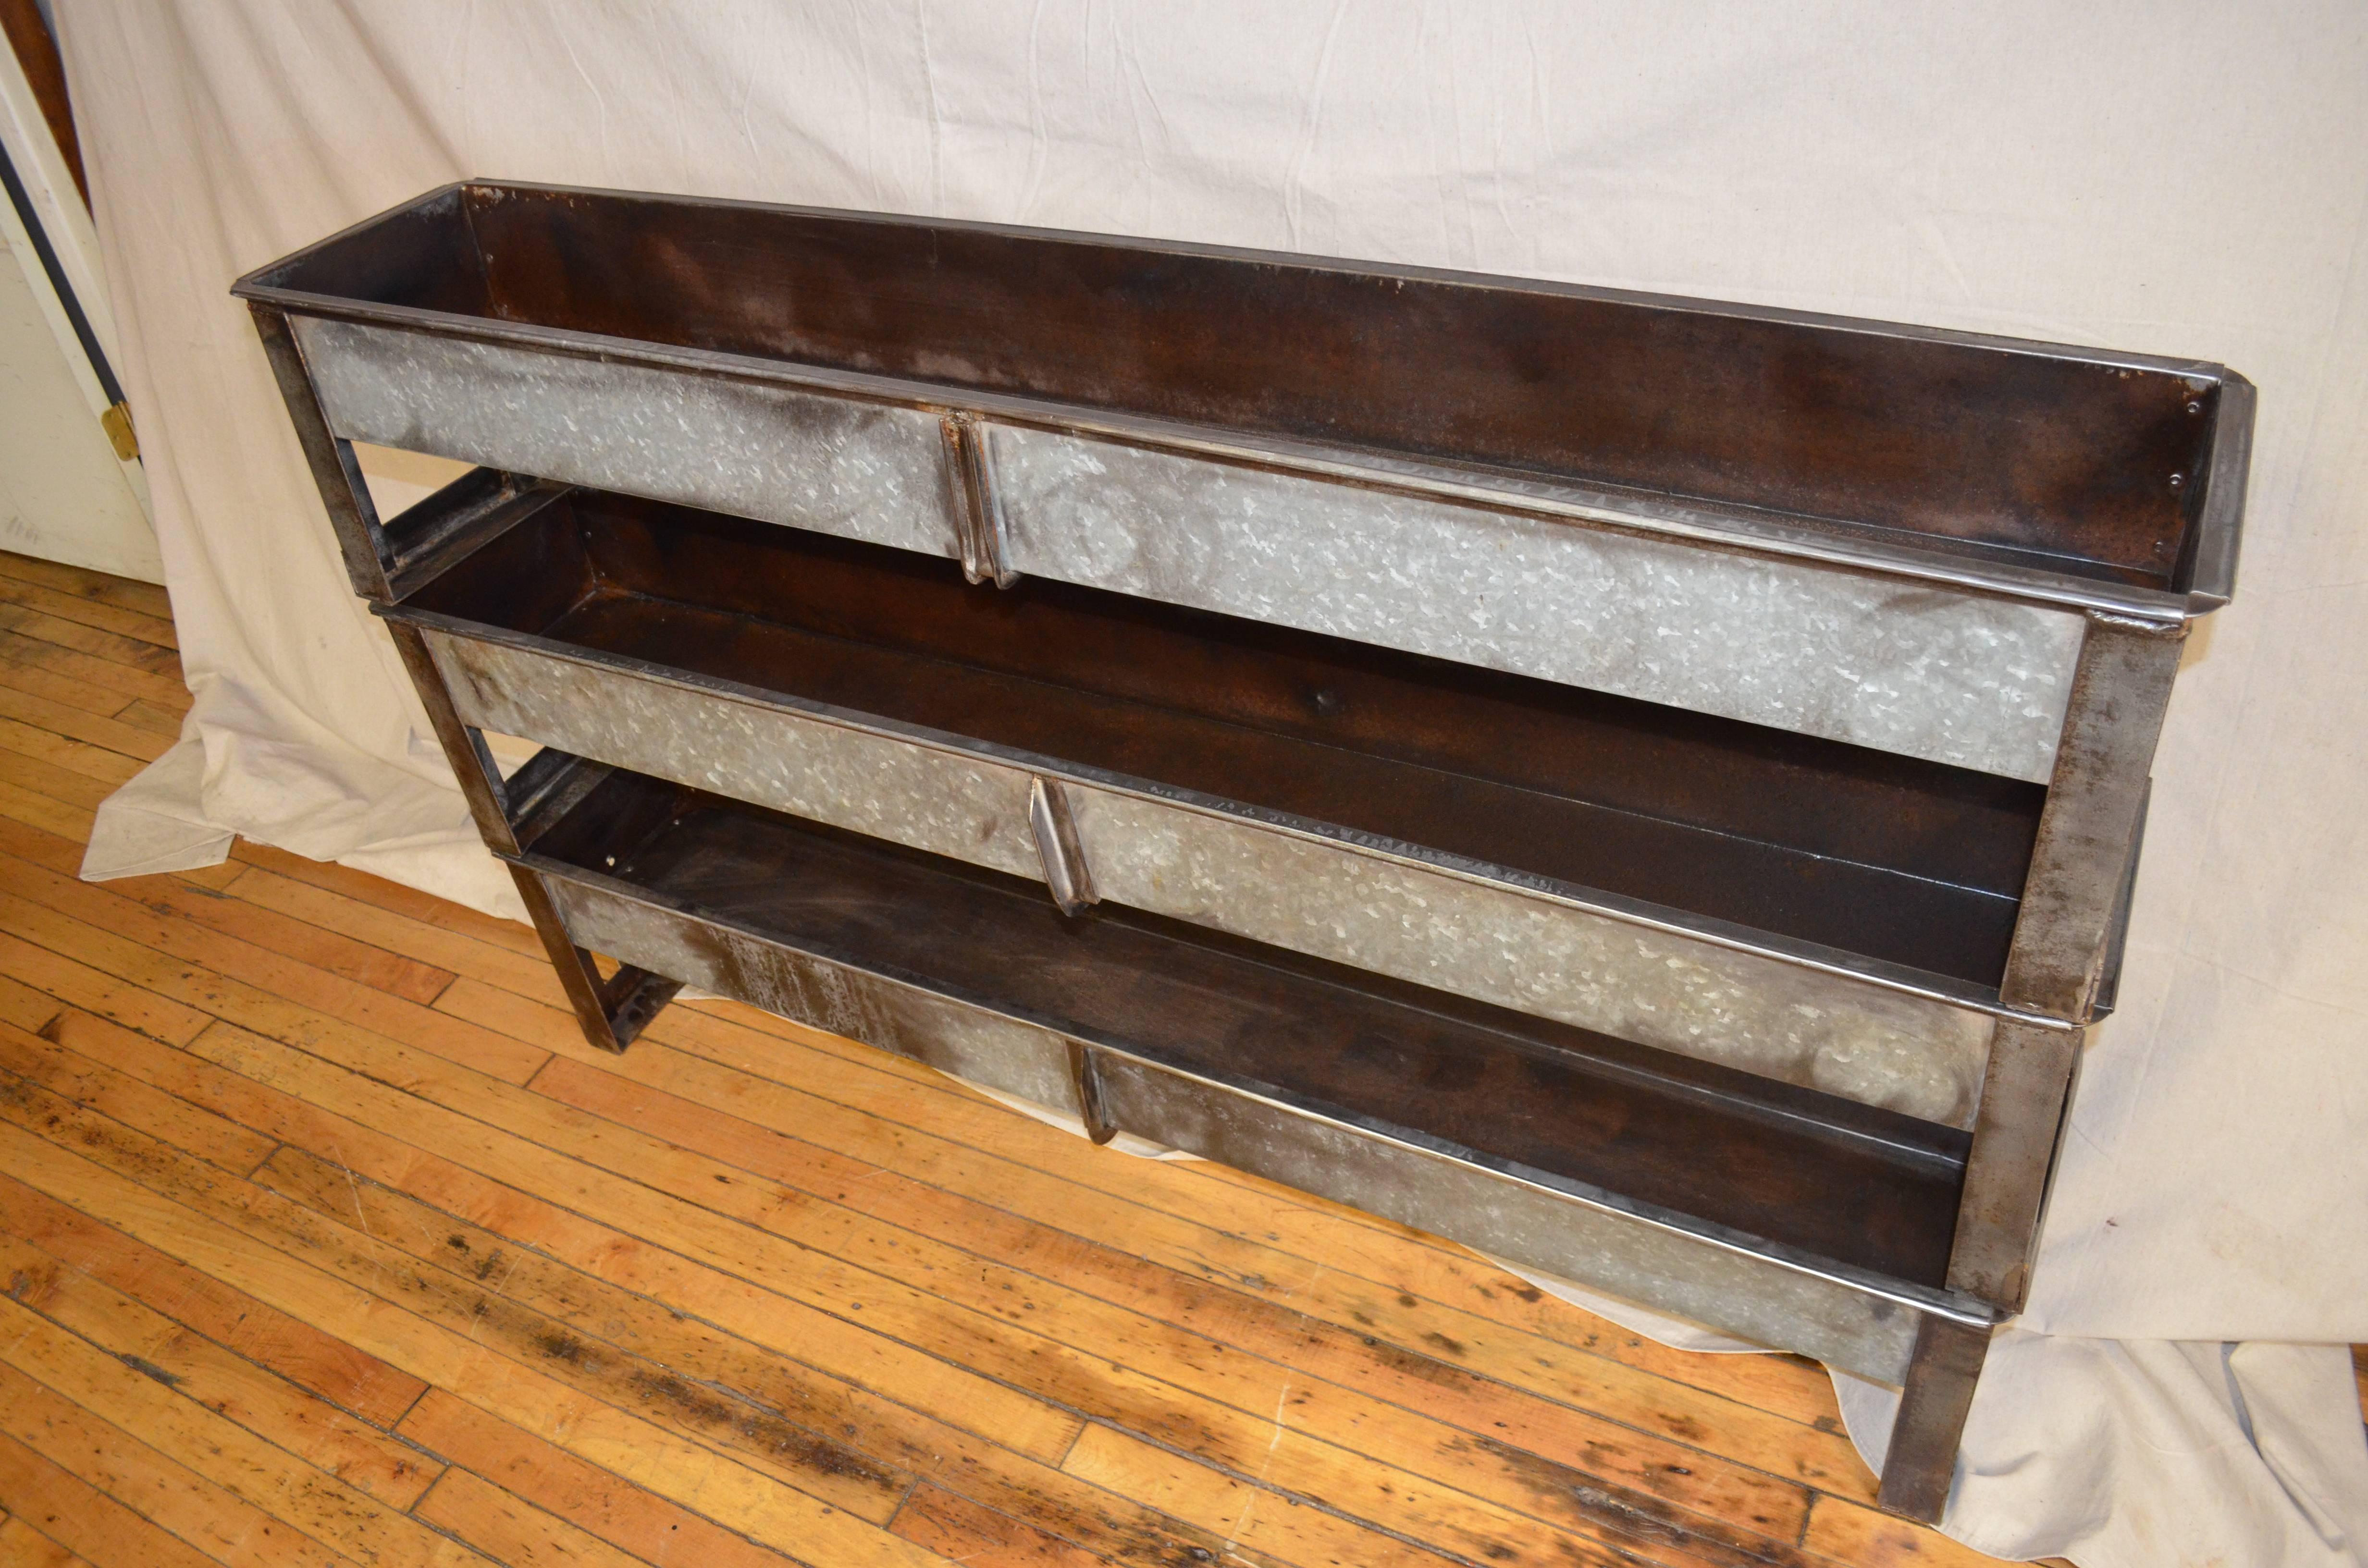 Planter from a fox feeder of galvanized steel with steel leg brackets. Planter has been cleaned and sealed and finished to a rich, mahogany patina. Solid, sturdy and ideal for spring floral design and plantings, herb garden, tomatoes, peppers and